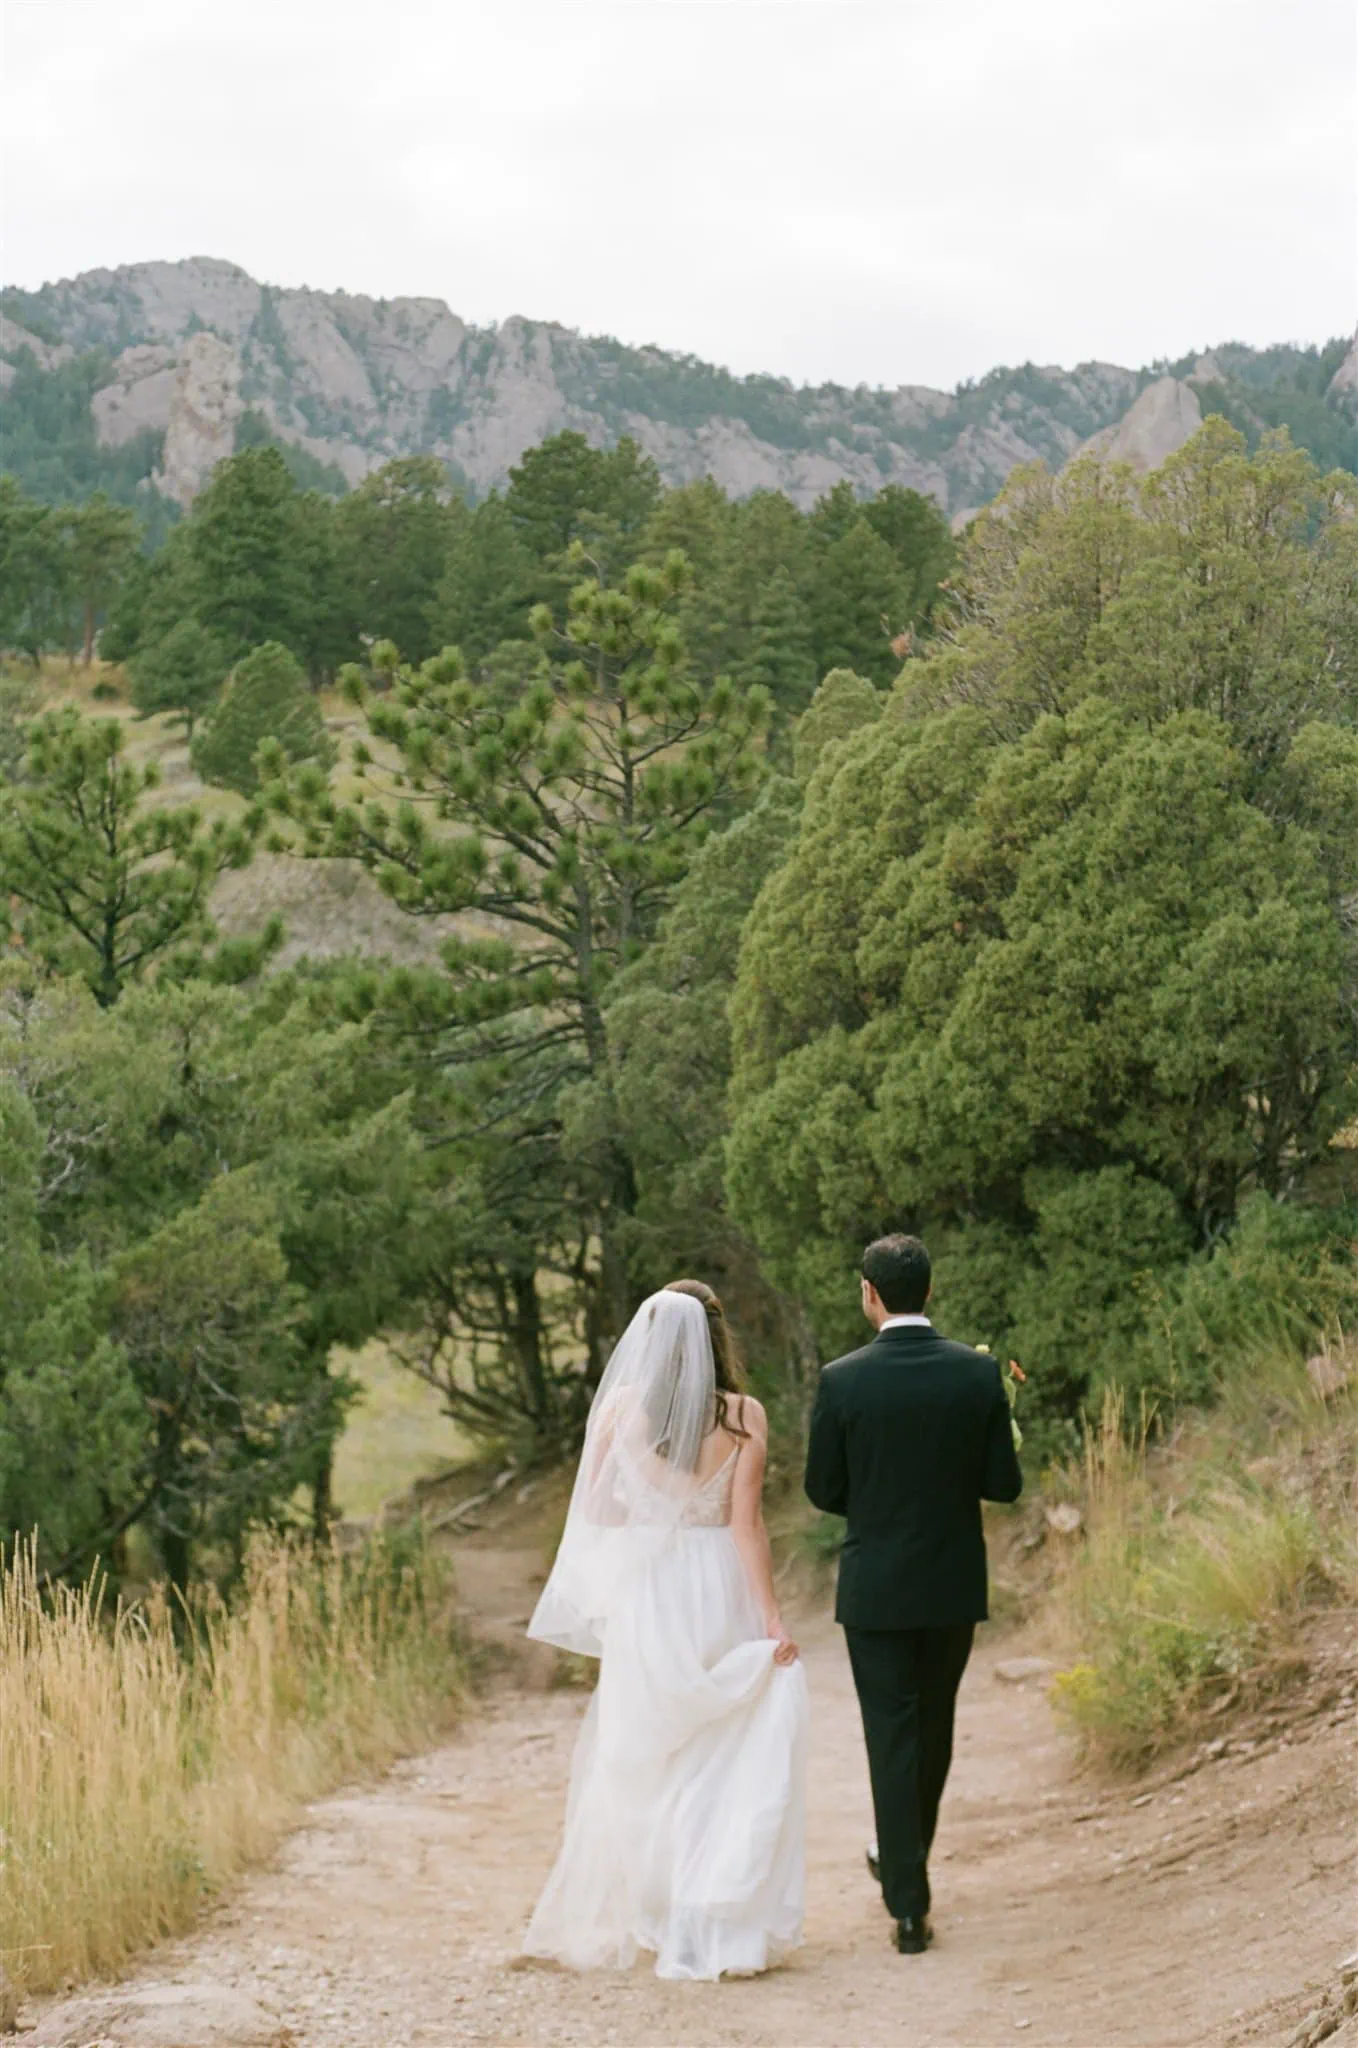 Colorado elopement photographed on 35mm film